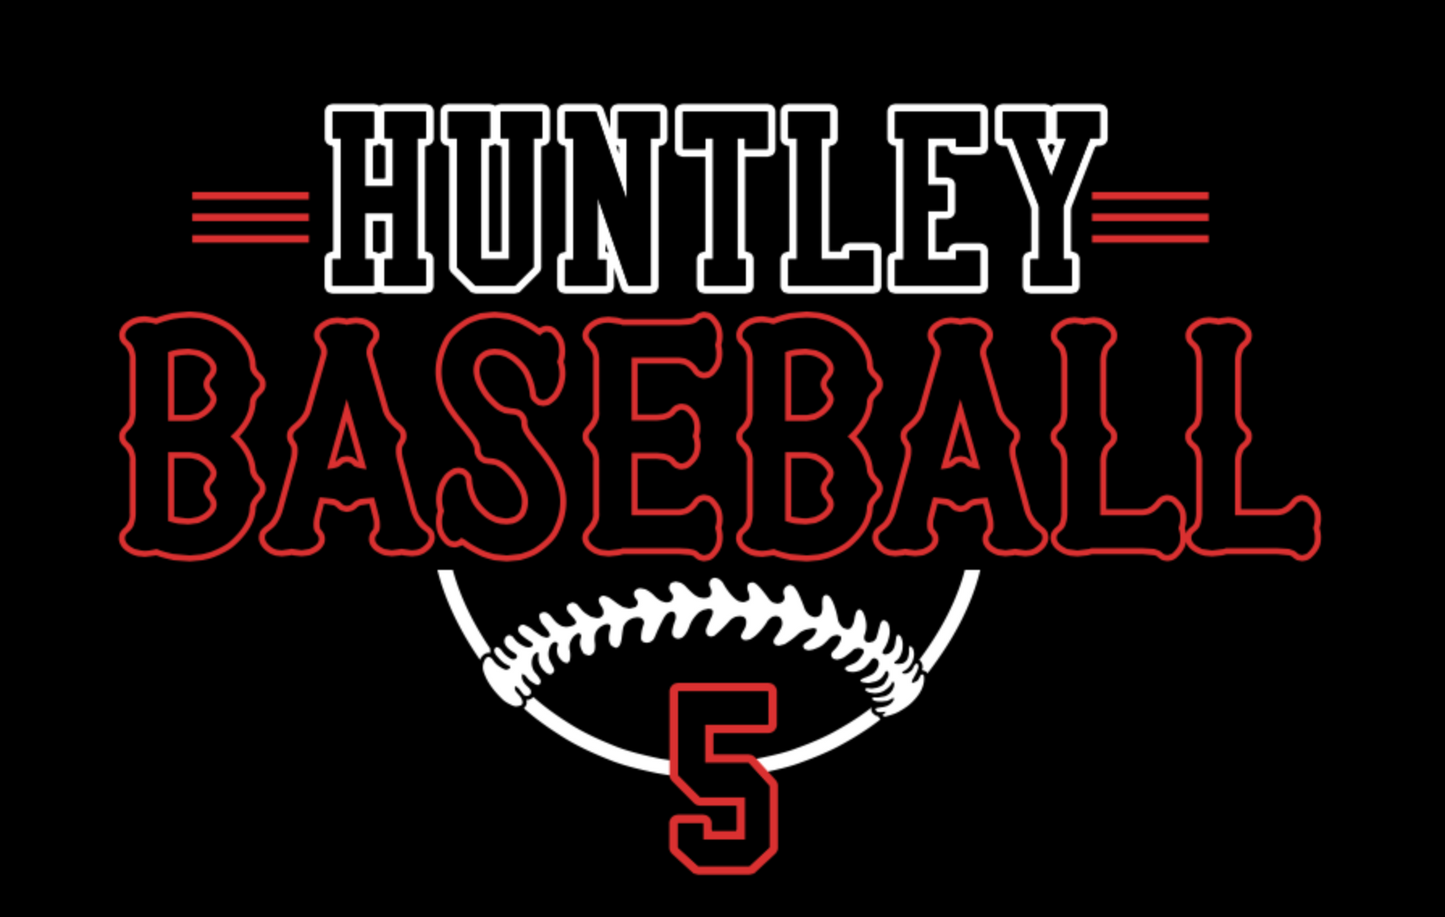 HUNTLEY BASEBALL WITH OR WITHOUT NUMBER